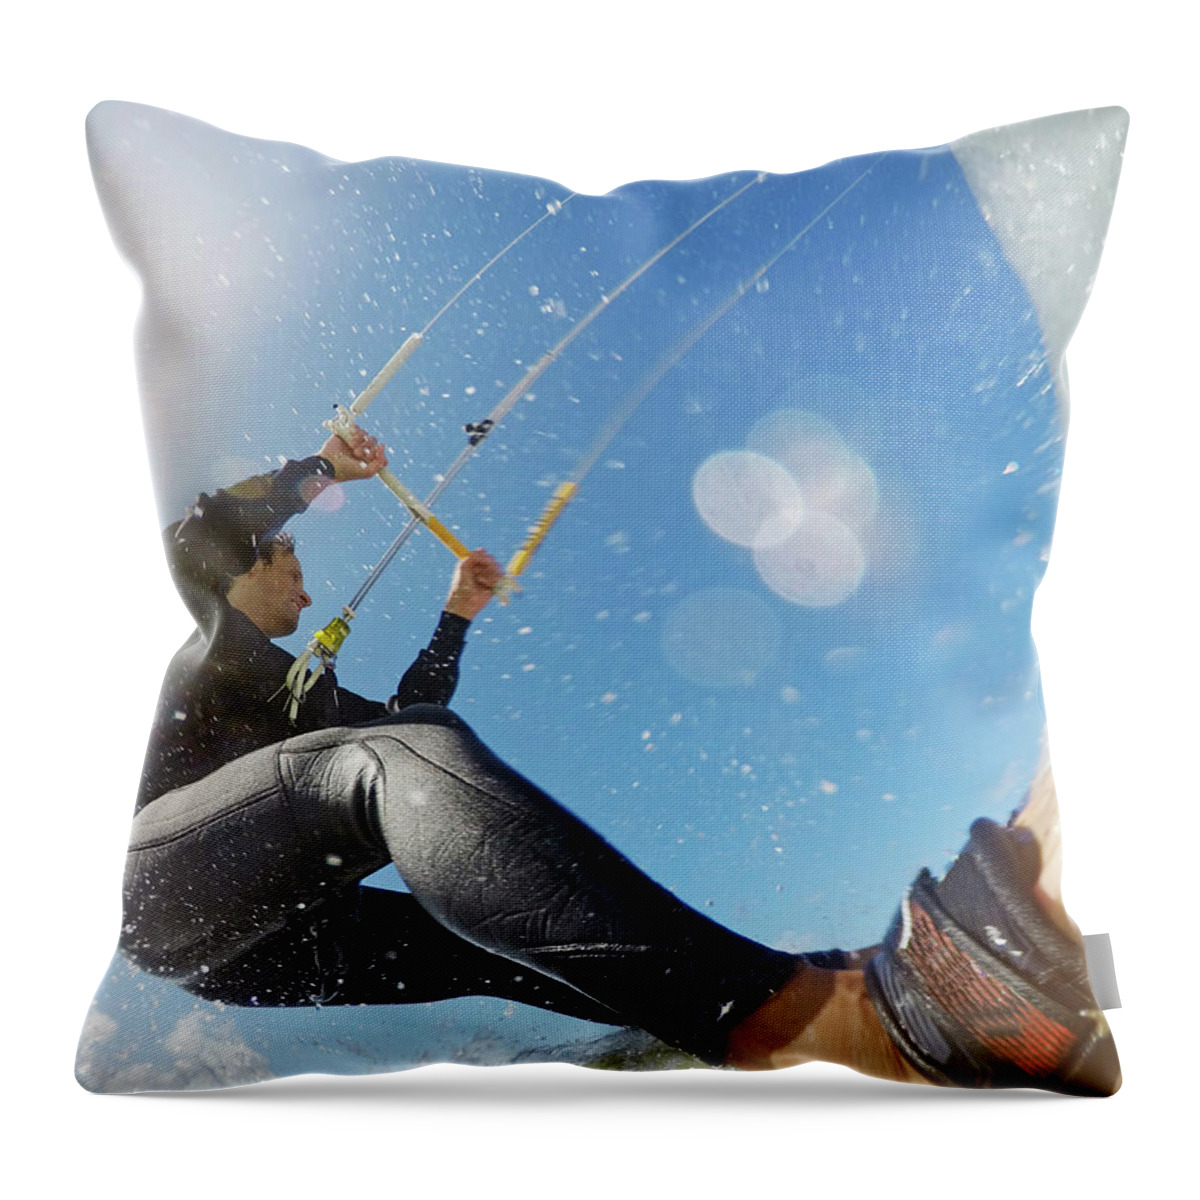 Spray Throw Pillow featuring the photograph Kitesurfaction In North Sea Of by Jan-otto